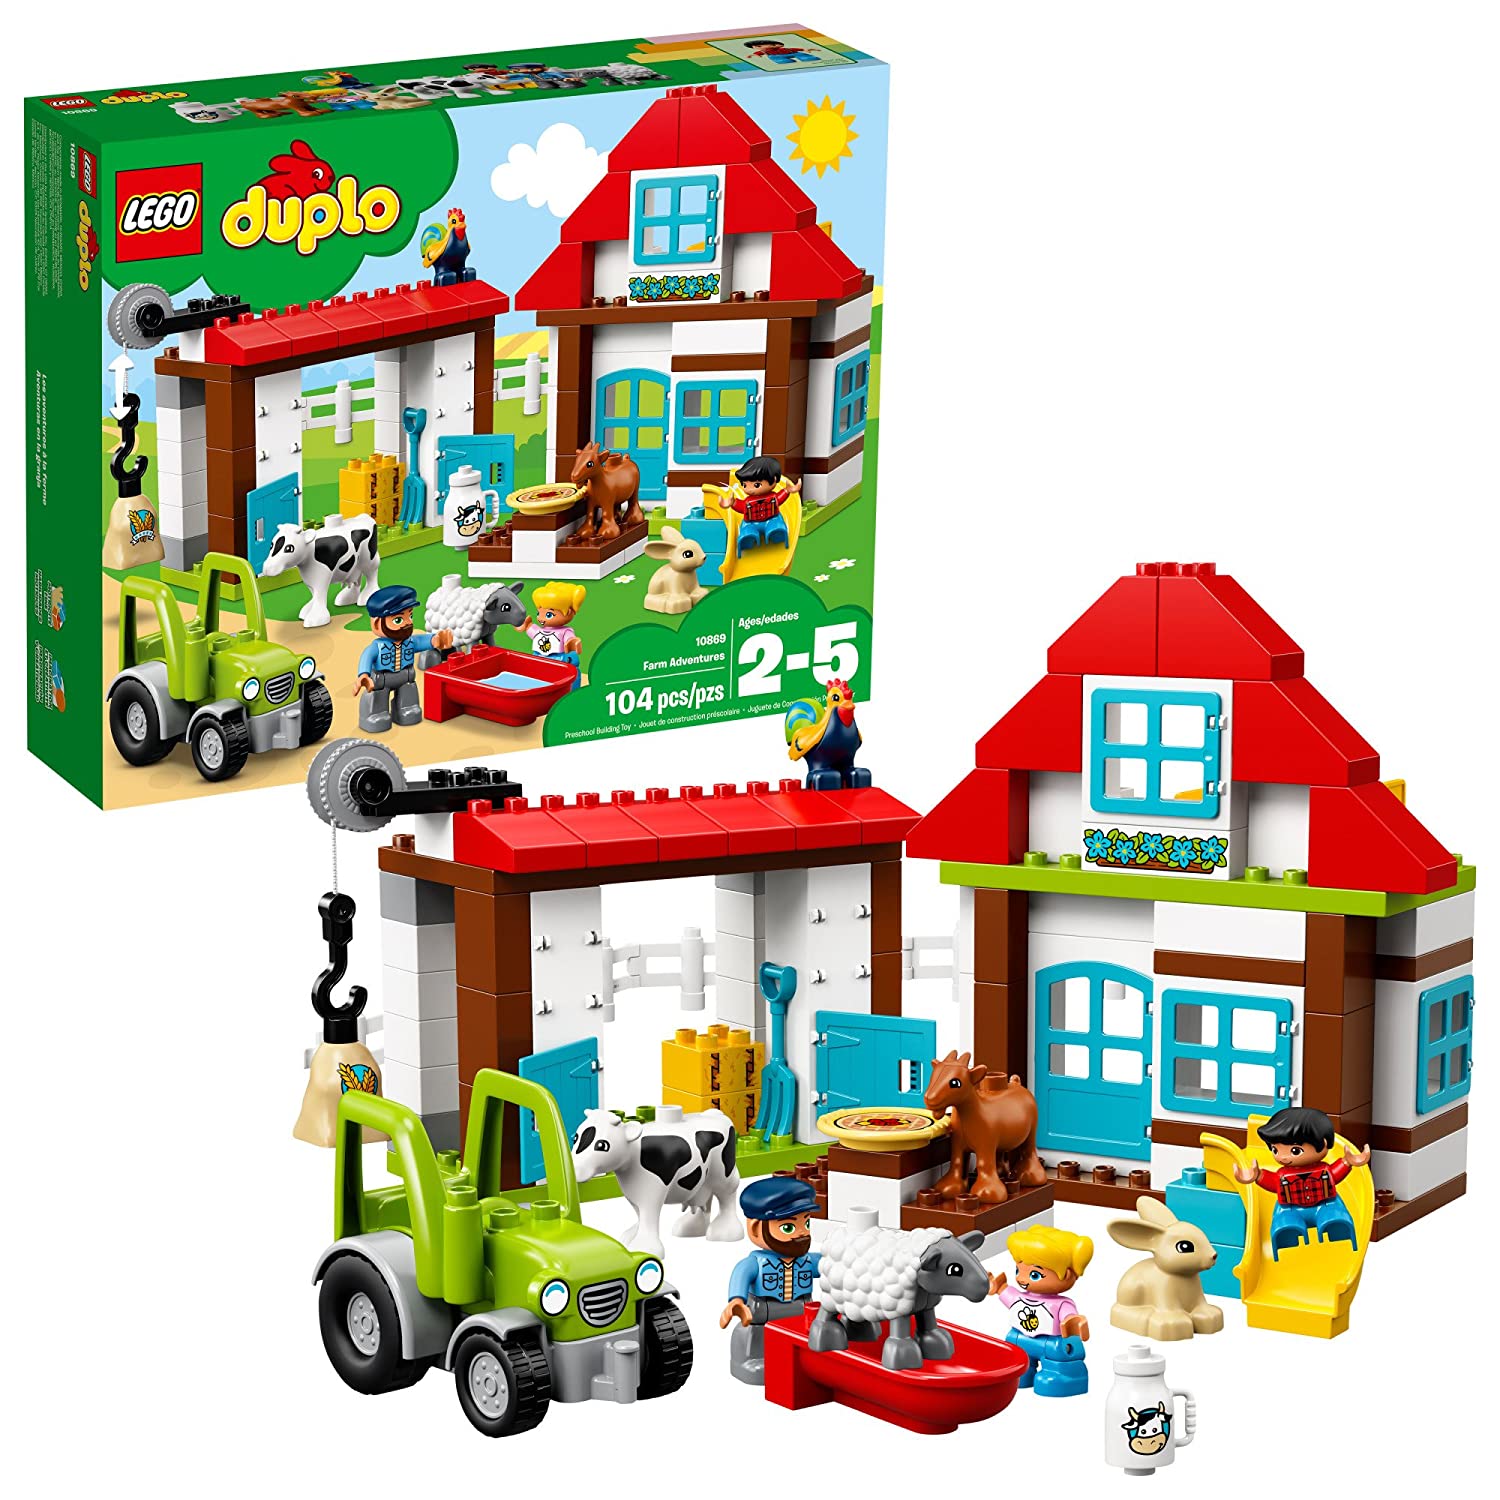 Top 9 Best Lego Duplo Sets Reviews in 2022 5